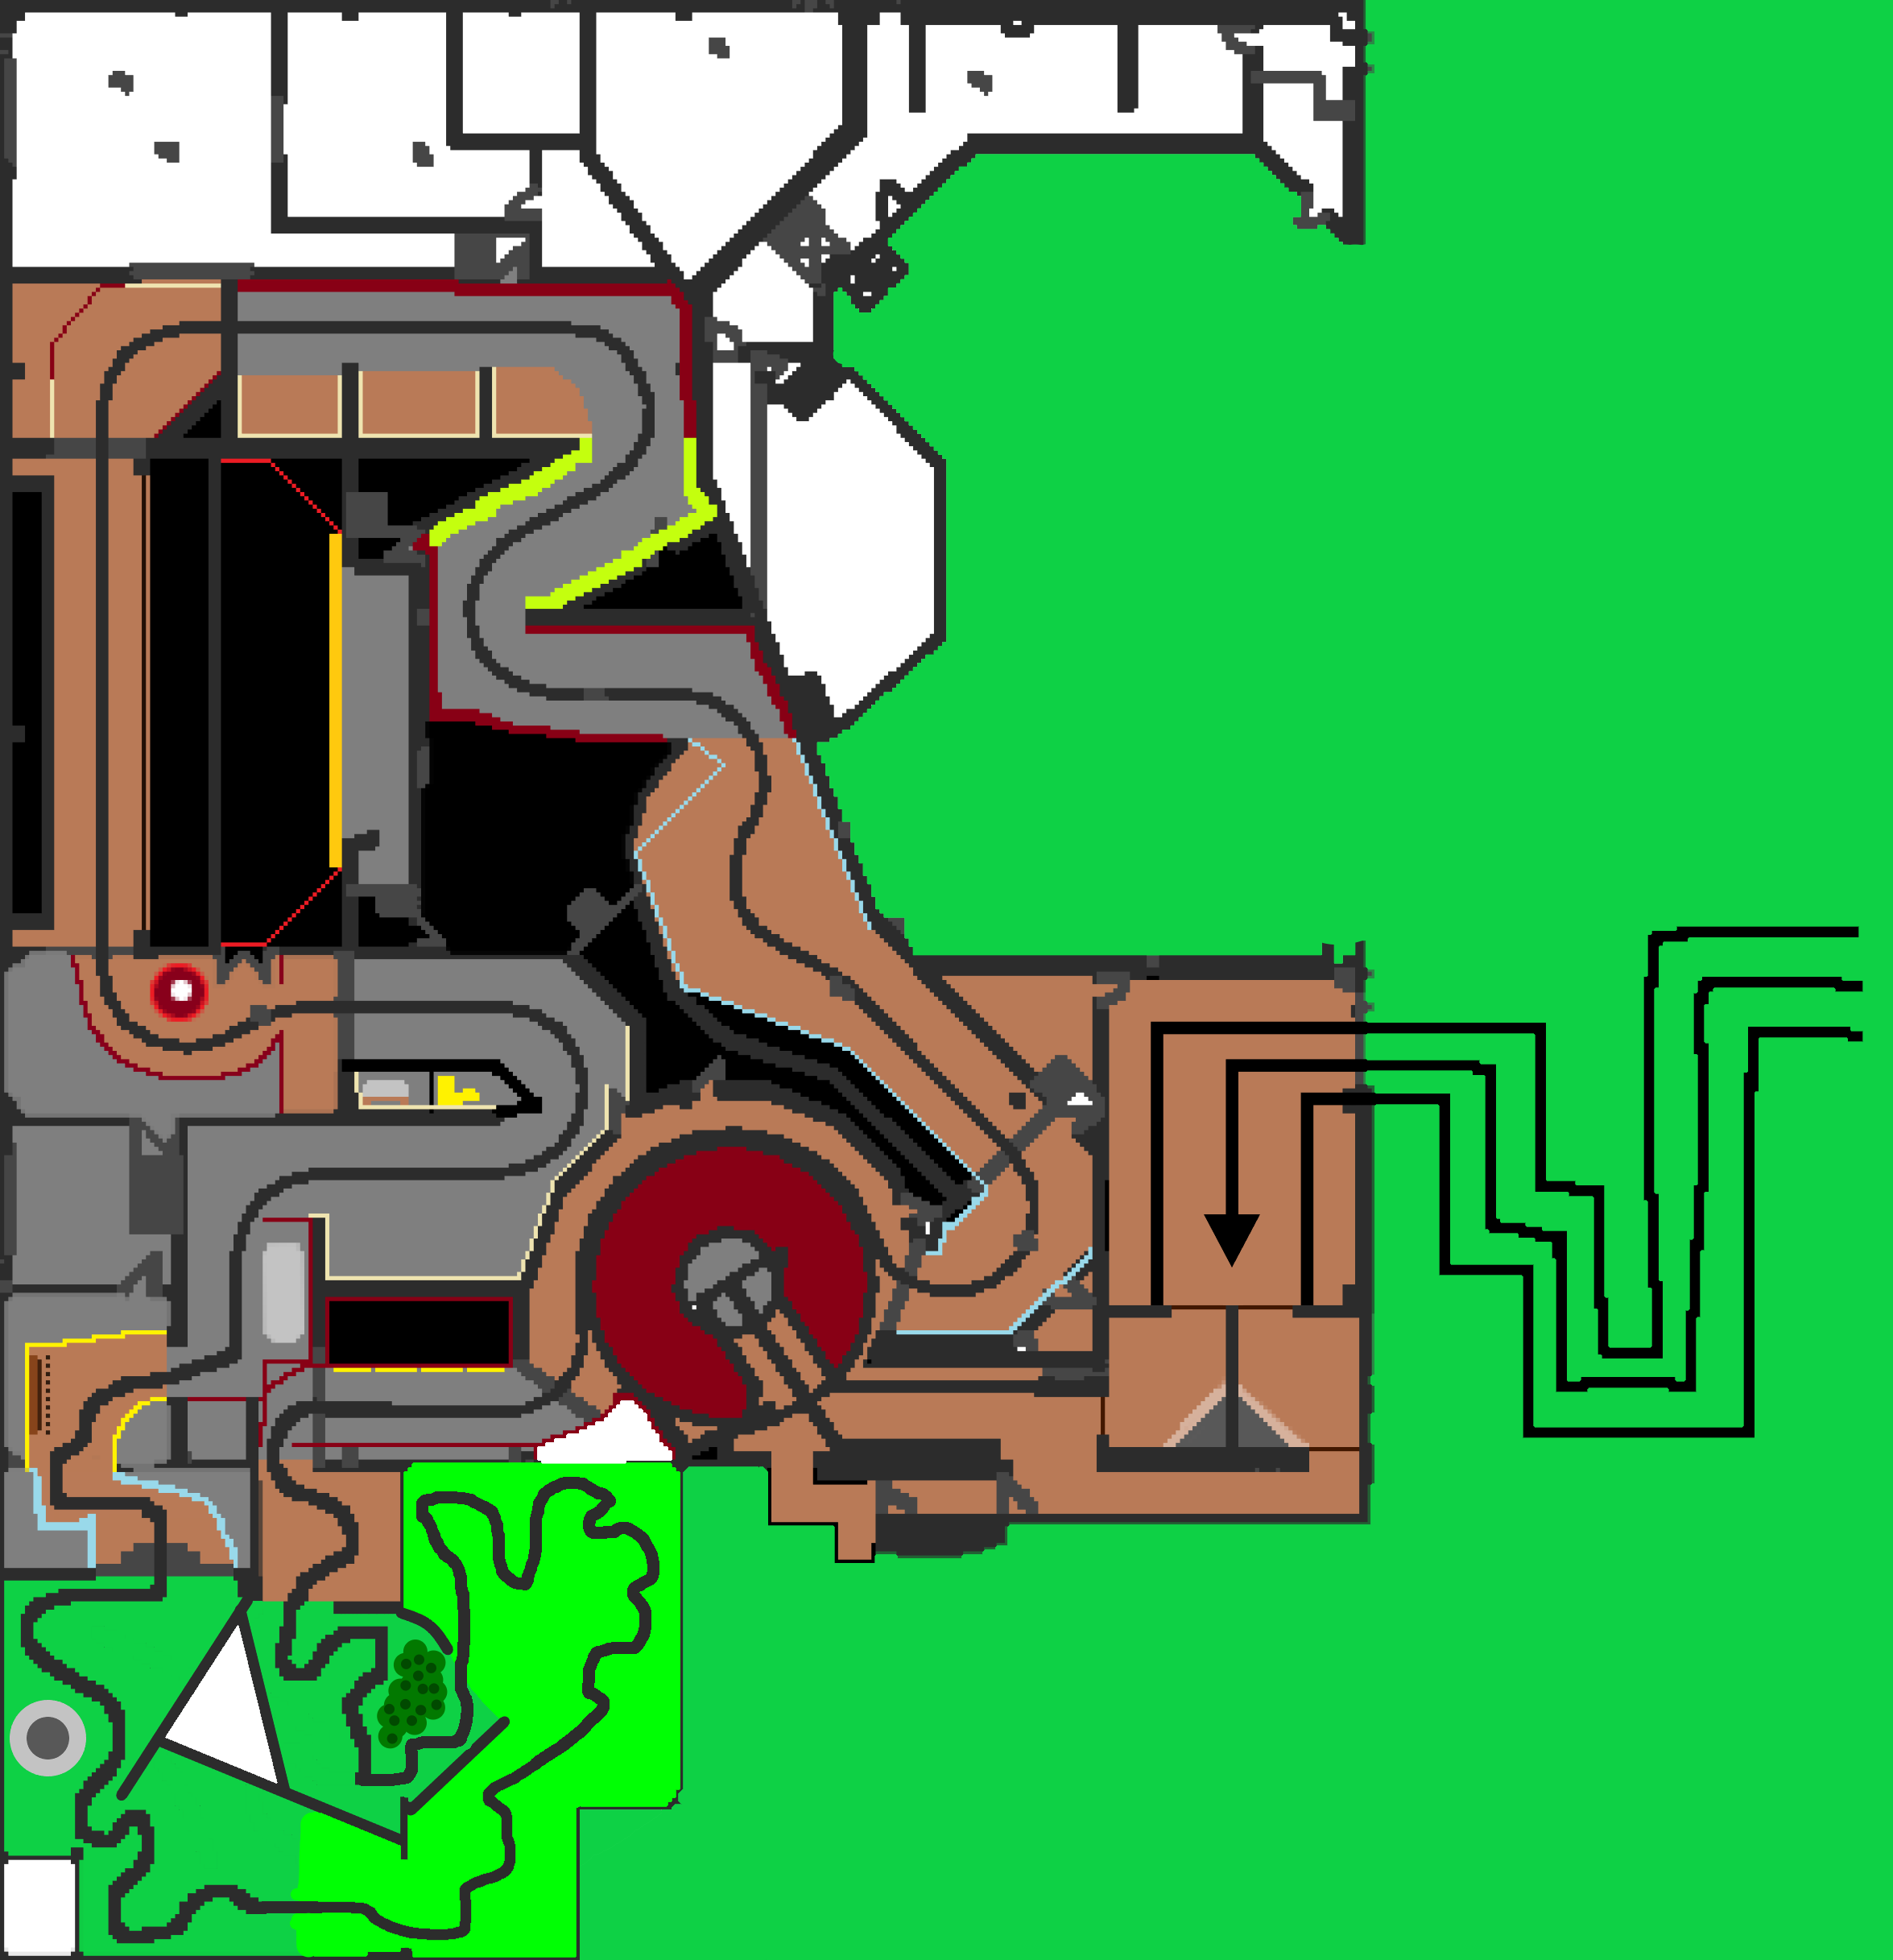 FNAF1 Map has finally been finished! More images coming soon! : r